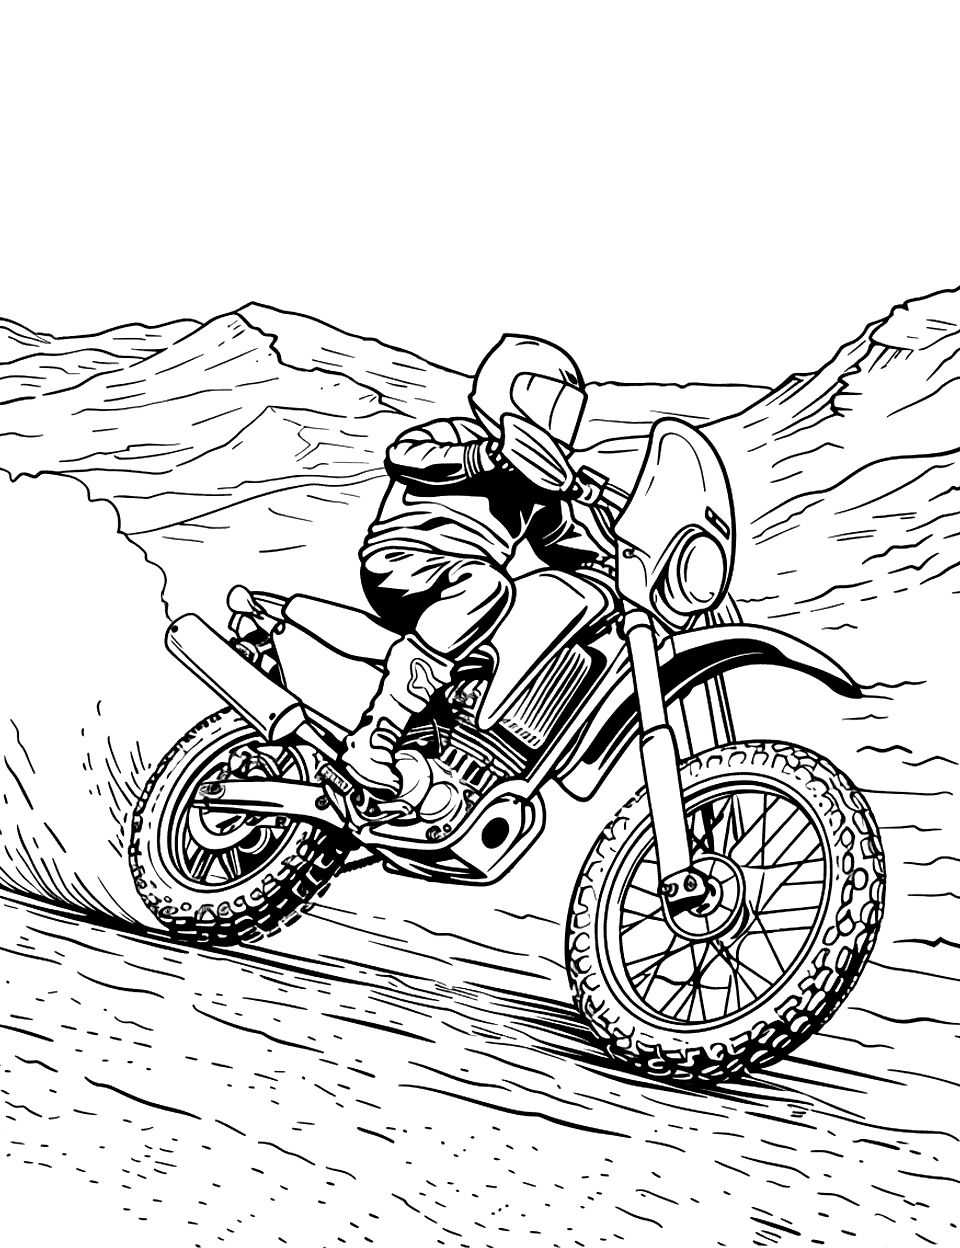 Desert Motorcycle Expedition Coloring Page - A motorcycle rider kicking up a trail of dust in a vast desert.